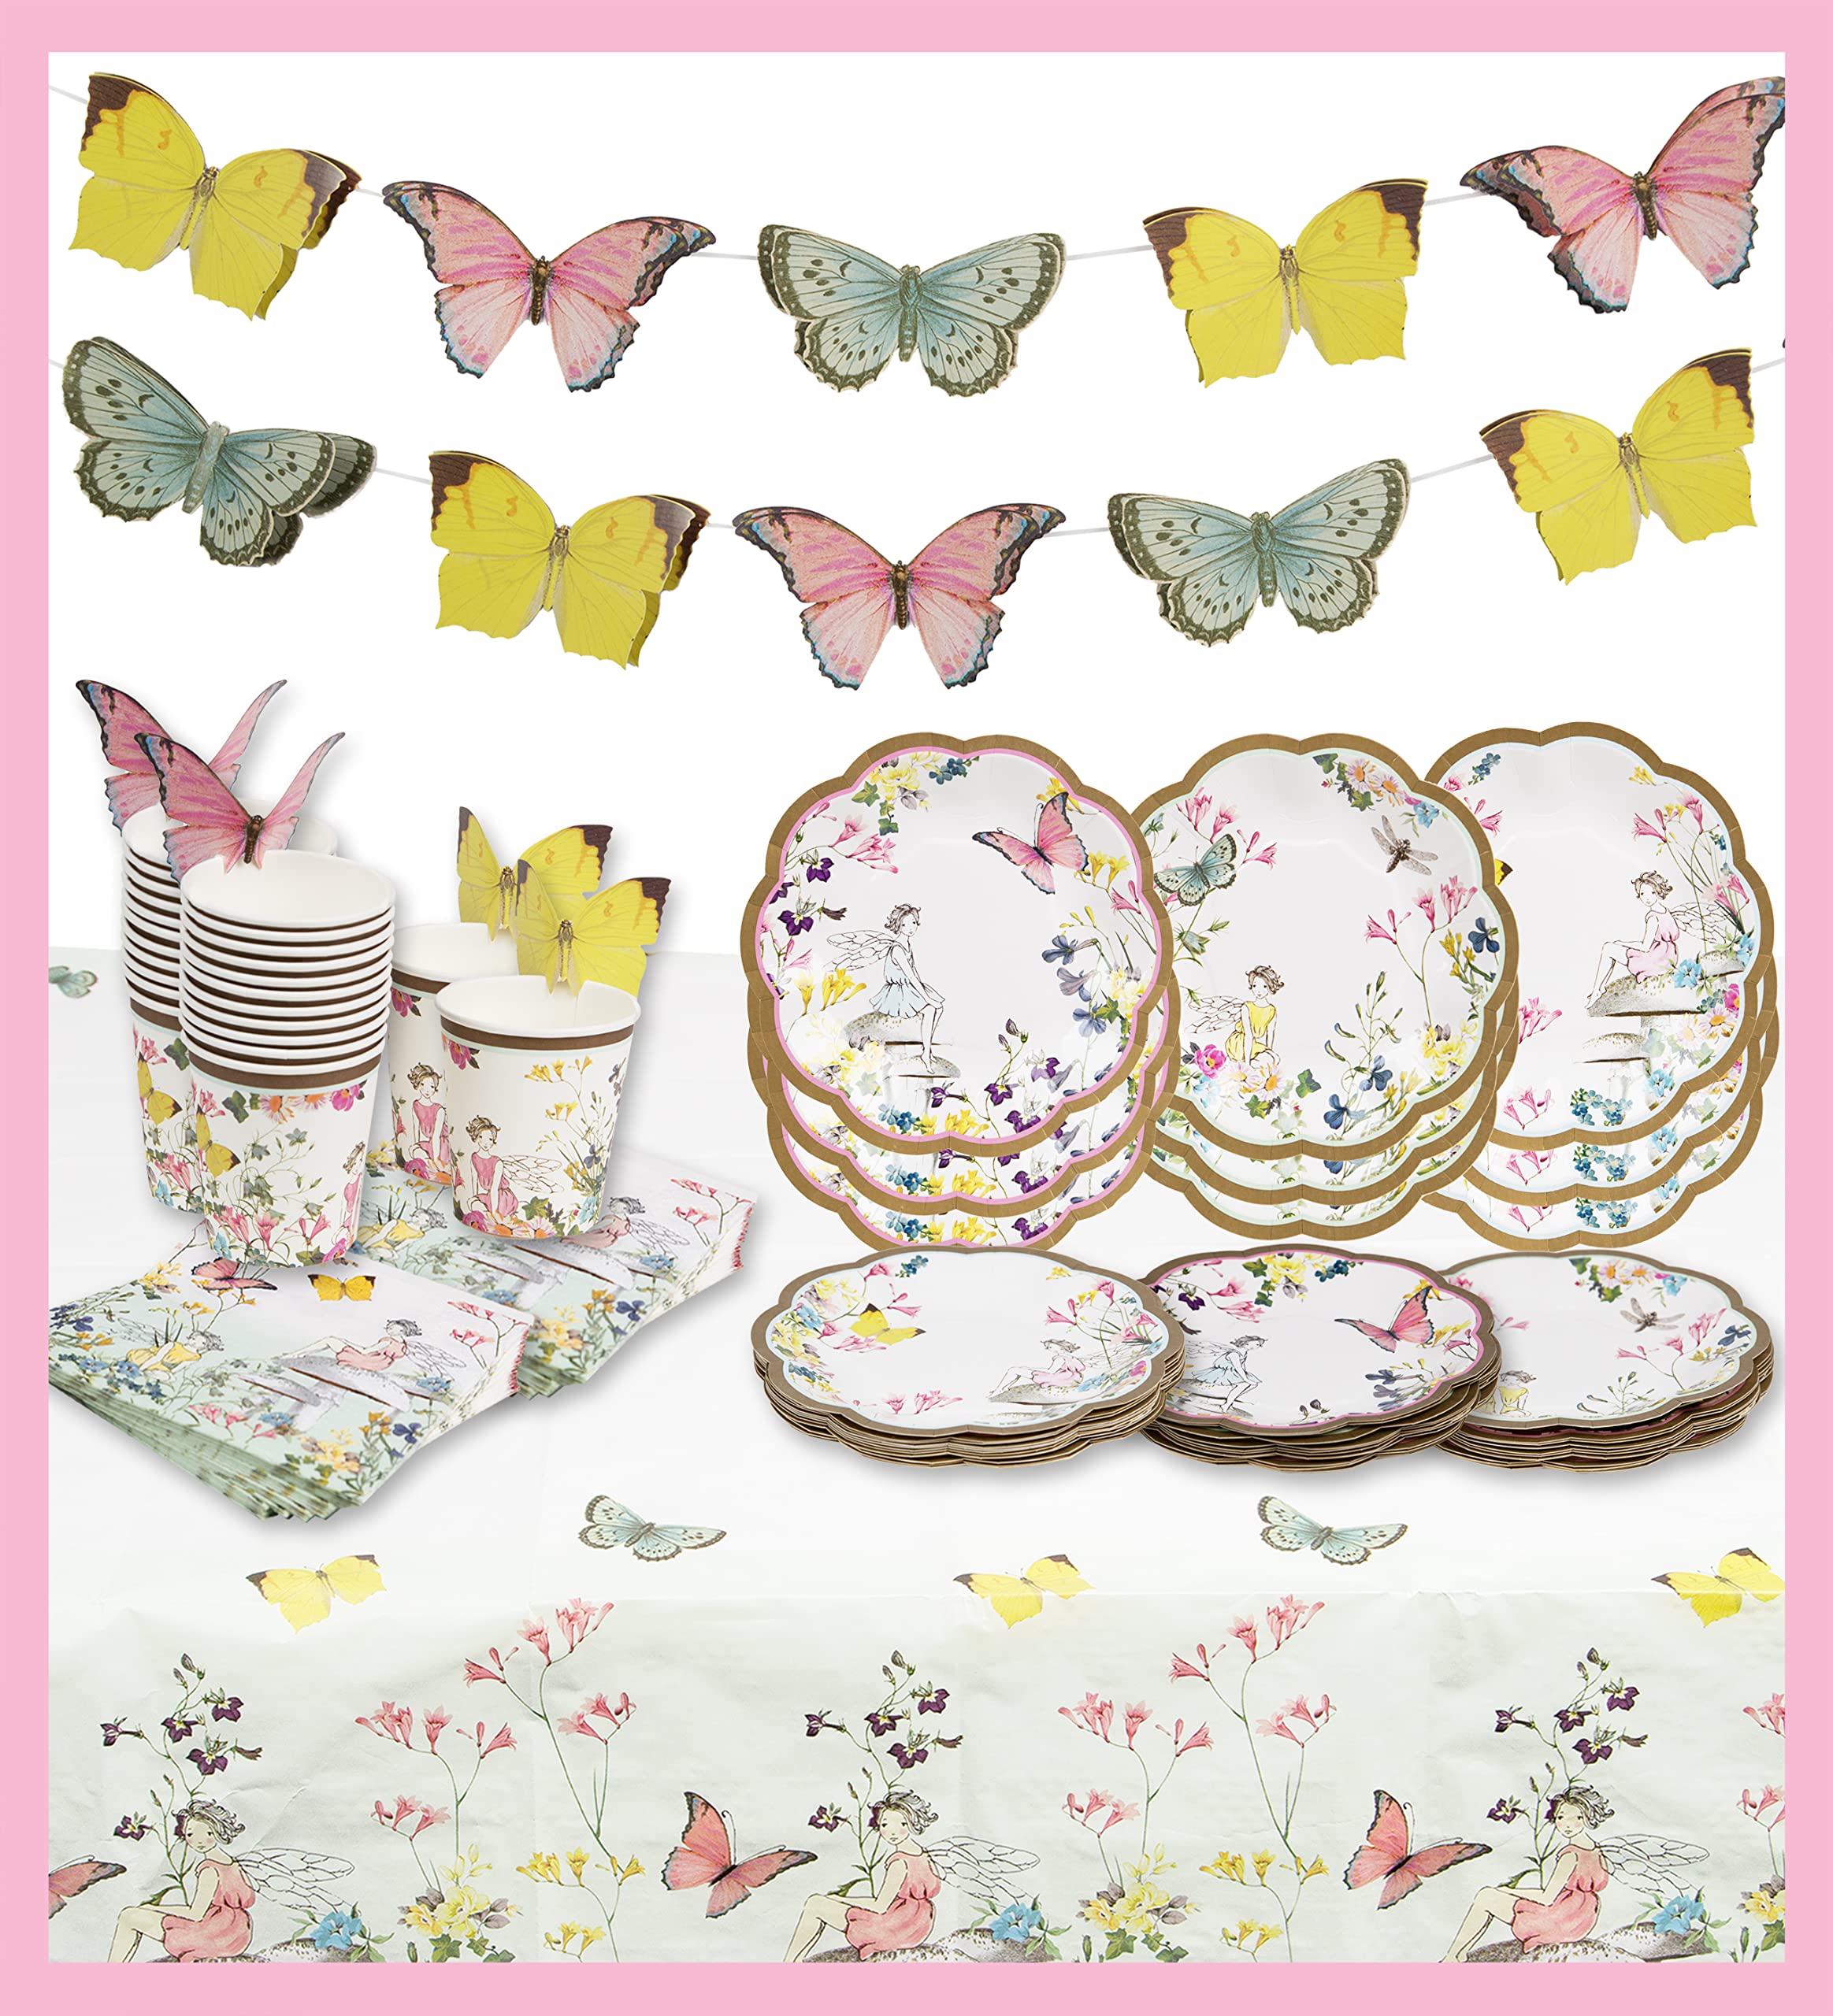 Talking Tables Fairy Party Decorations and Disposable Tableware for 16 Guests | Butterfly Bunting, Tablecloth, Cups, Plates and Napkins | for Kids Birthday, Mother's Day, Afternoon Tea, Baby Shower